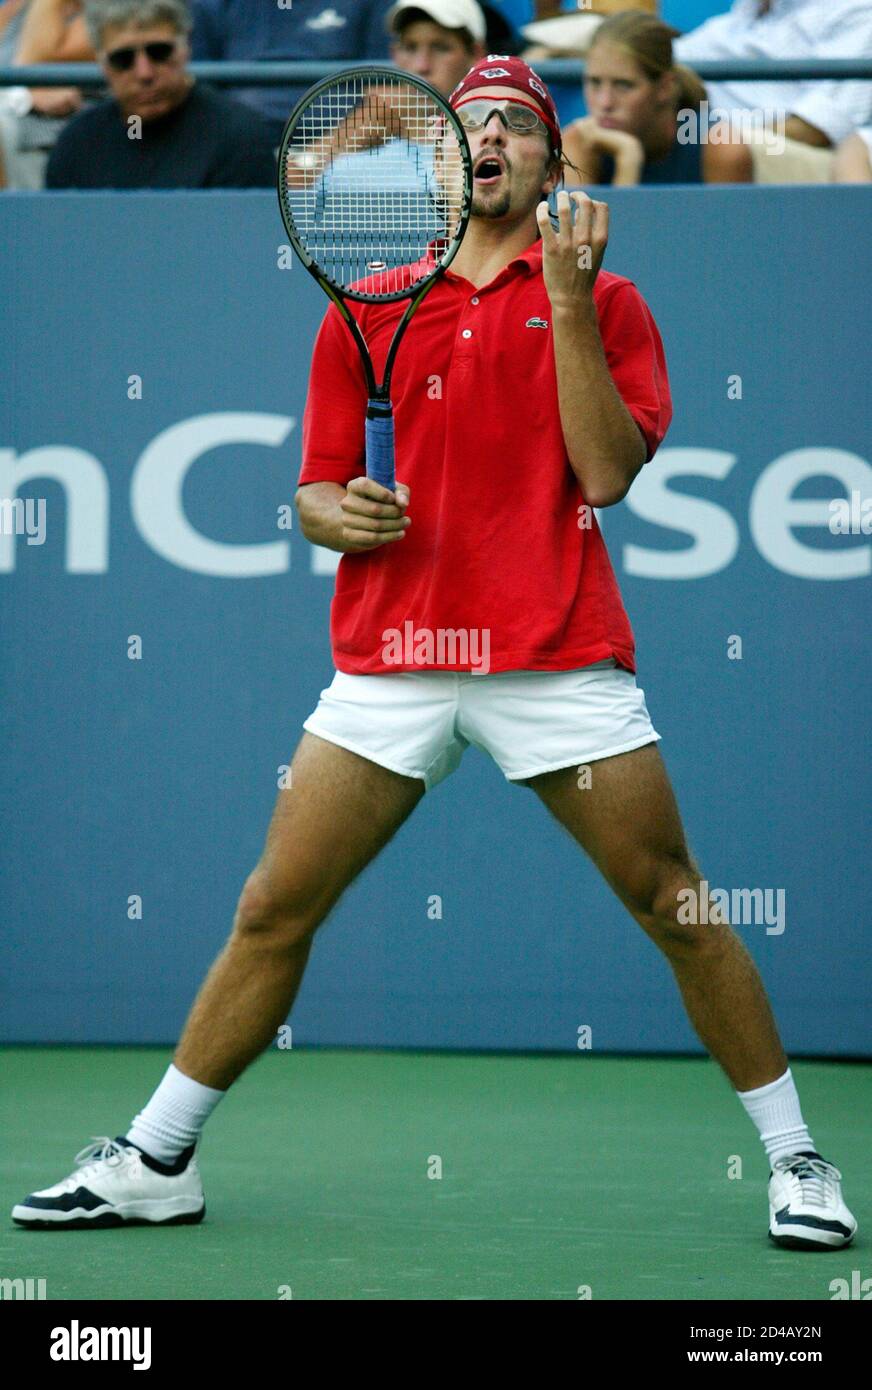 Arnaud Clement of France reacts after a missed point against Fernando  Gonzalez of Chile during their match at the U.S. Open in Flushing, New  York, September 3, 2002. Gonzalez defeated Clement 6-4